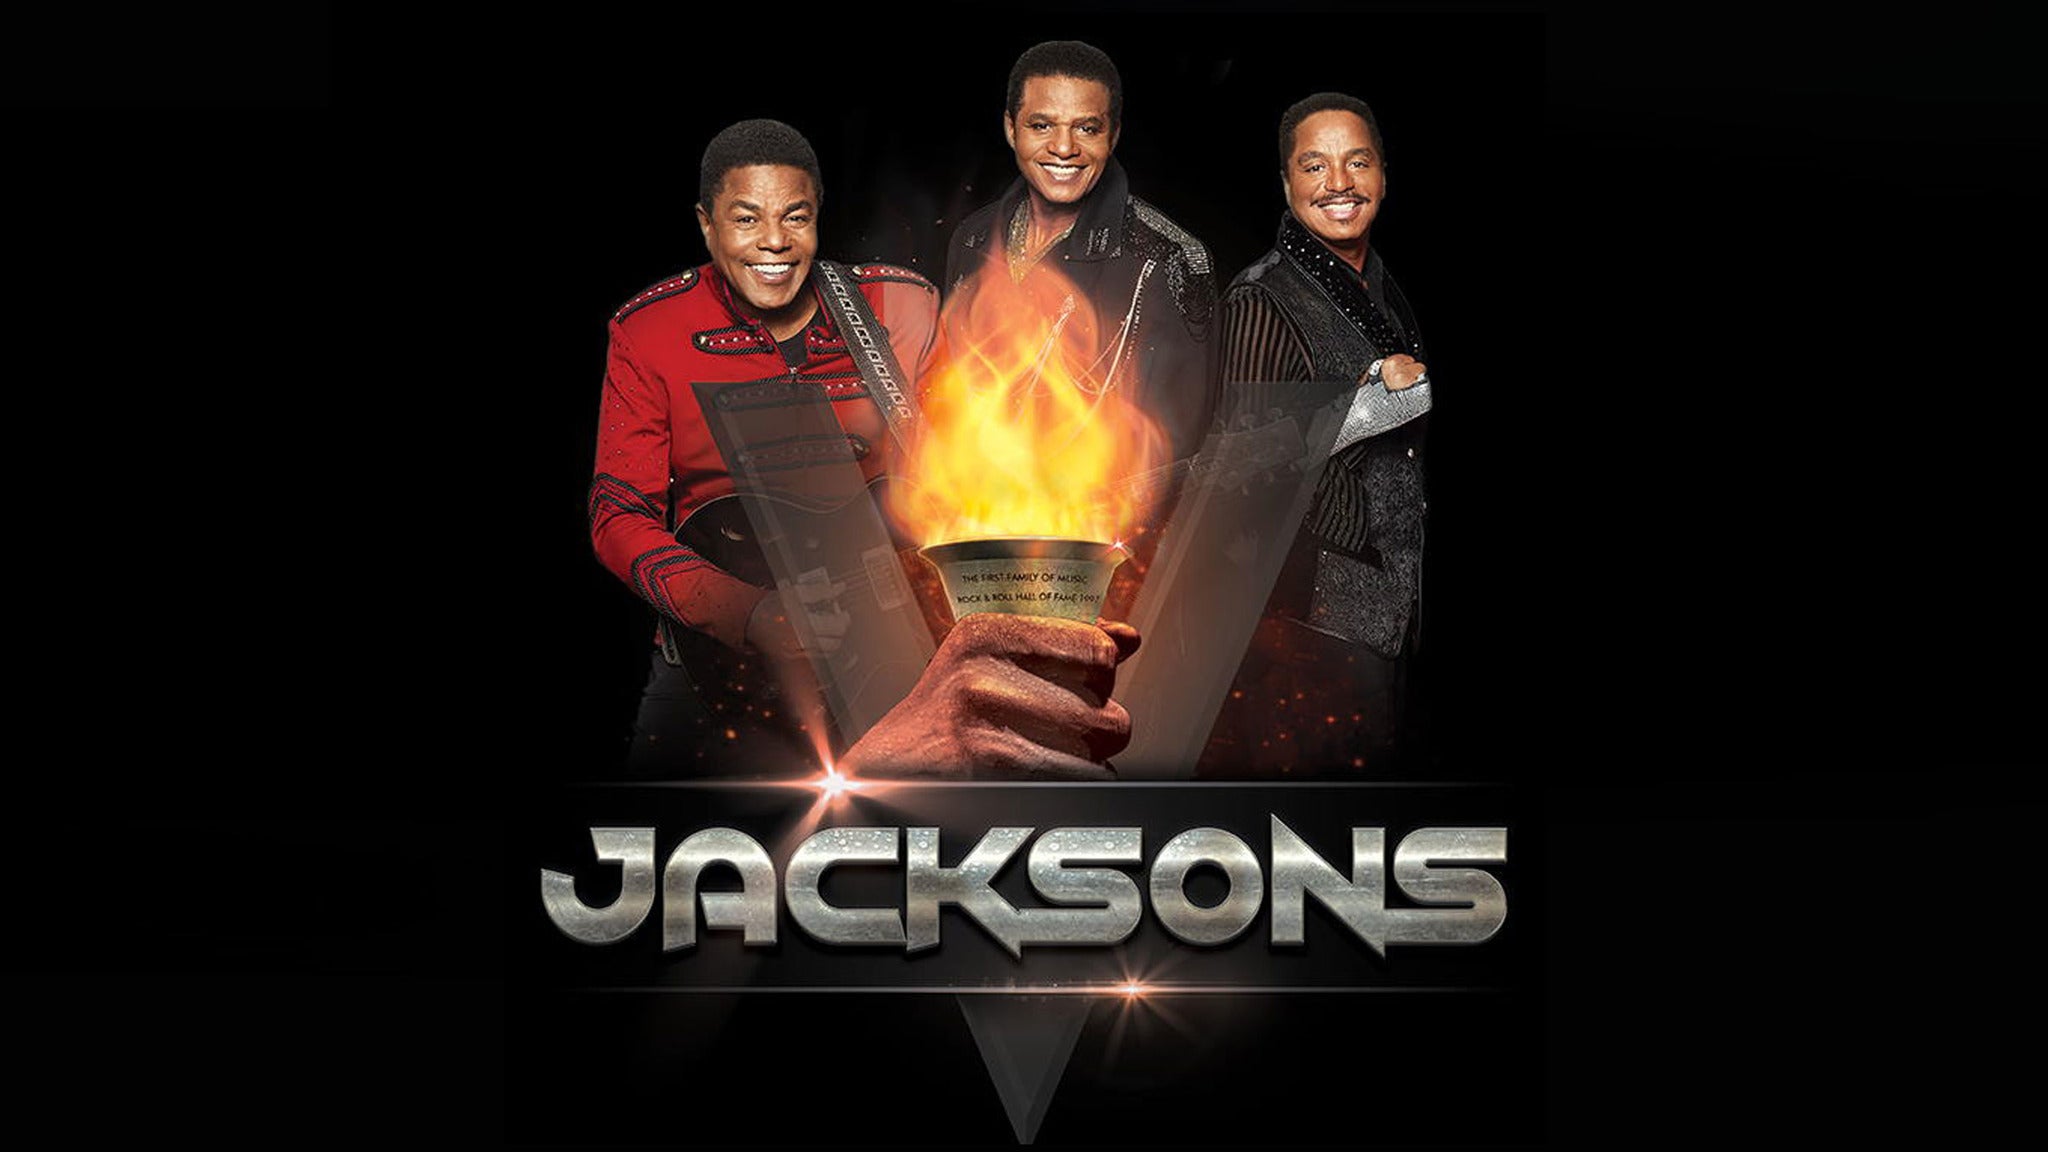 The Jacksons in Gary promo photo for Unity presale offer code